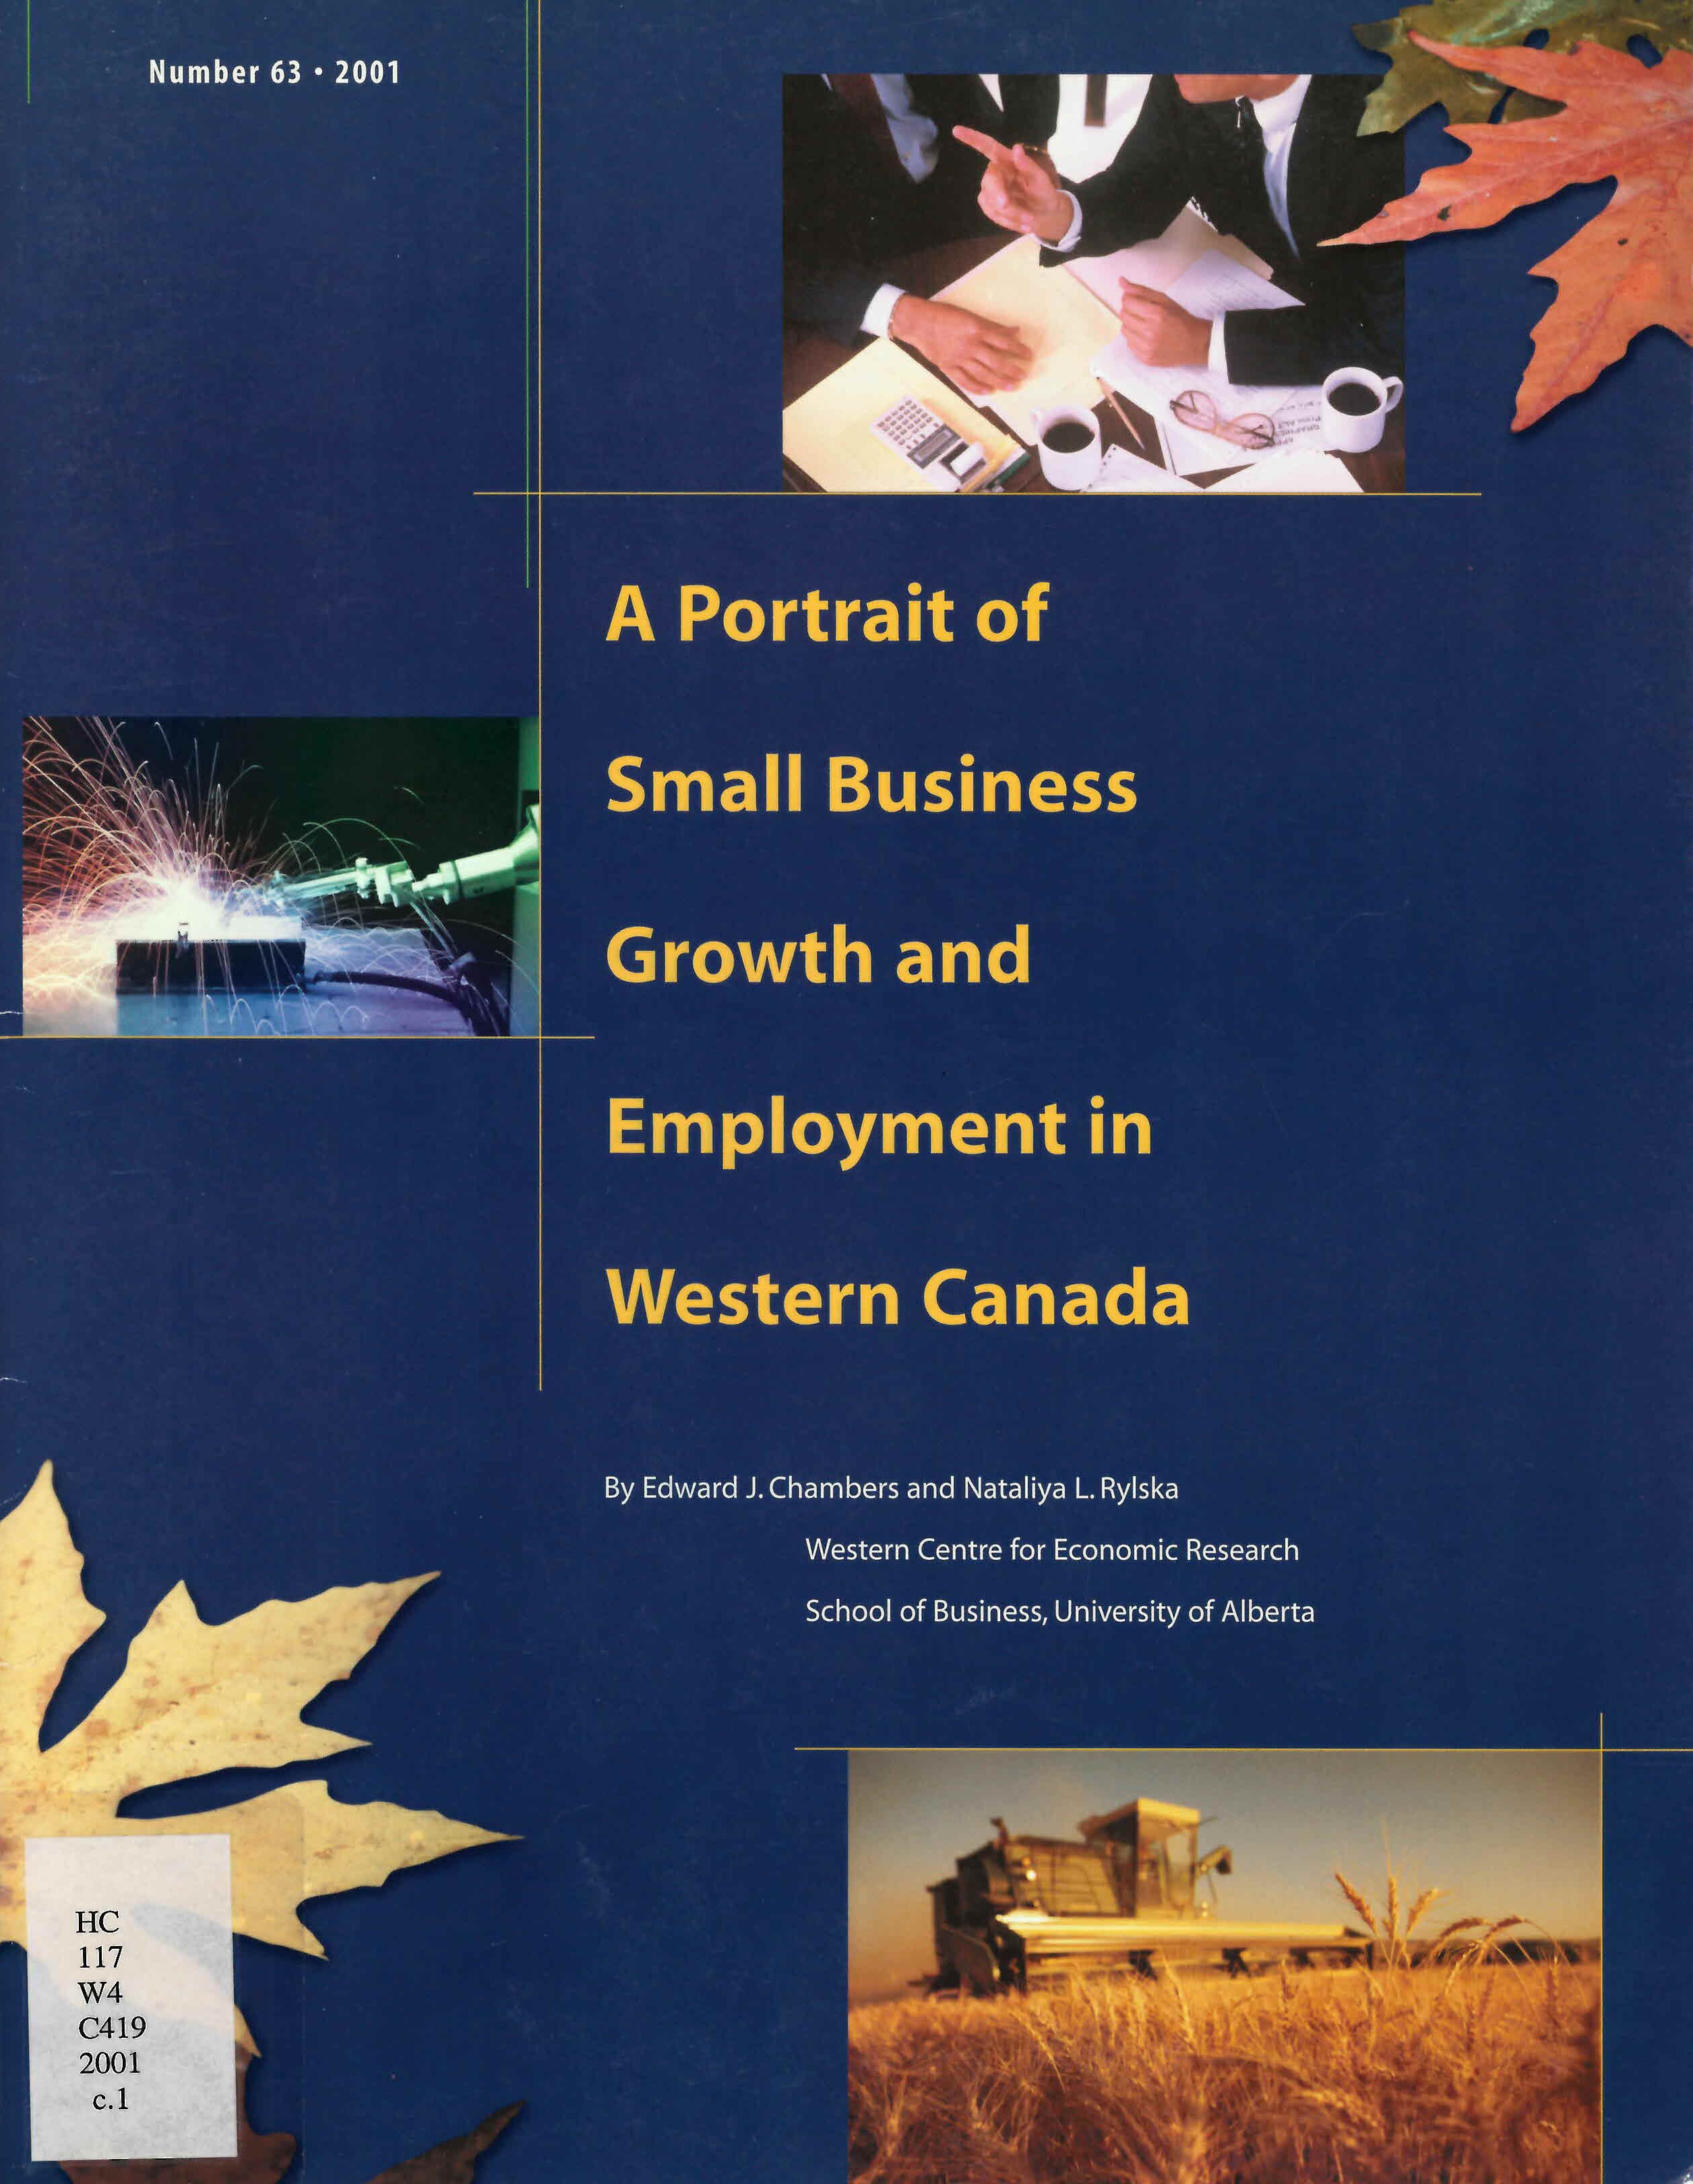 A portrait of small business growth and employment in Western Canada